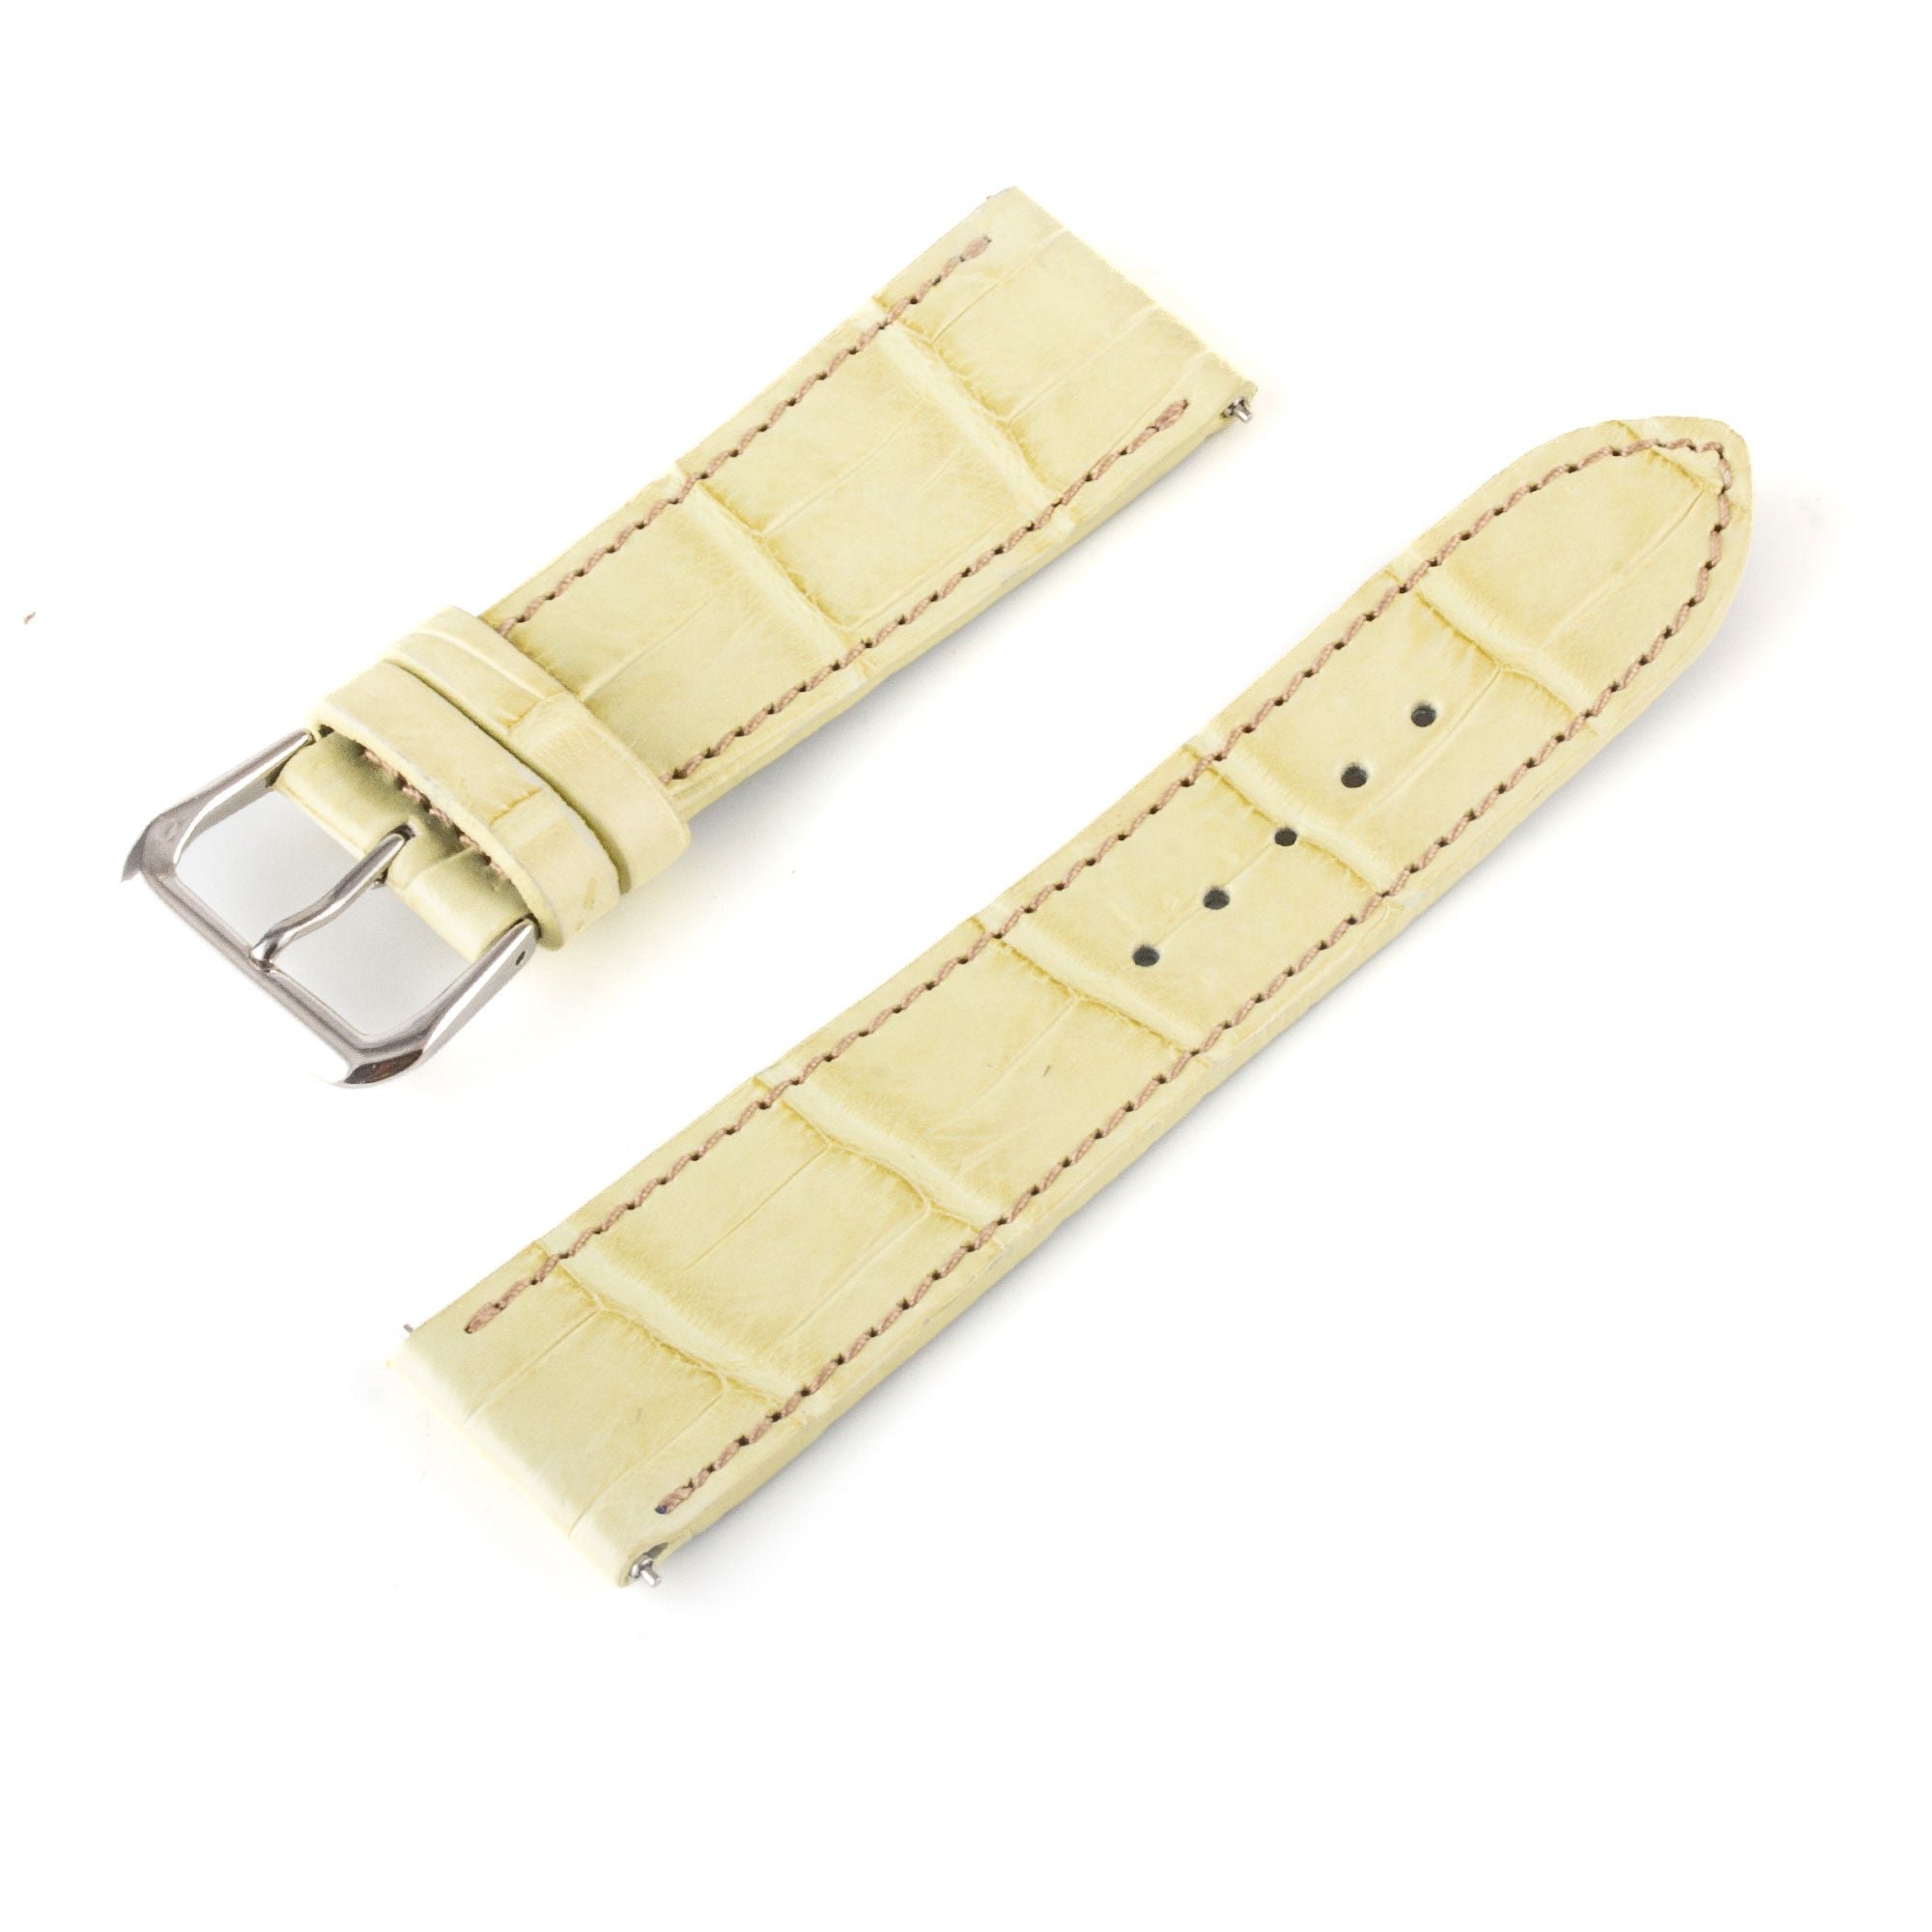 Alligator "Solo" leather watch band - 21mm width (0.83 inches) / Size M (n° 7)